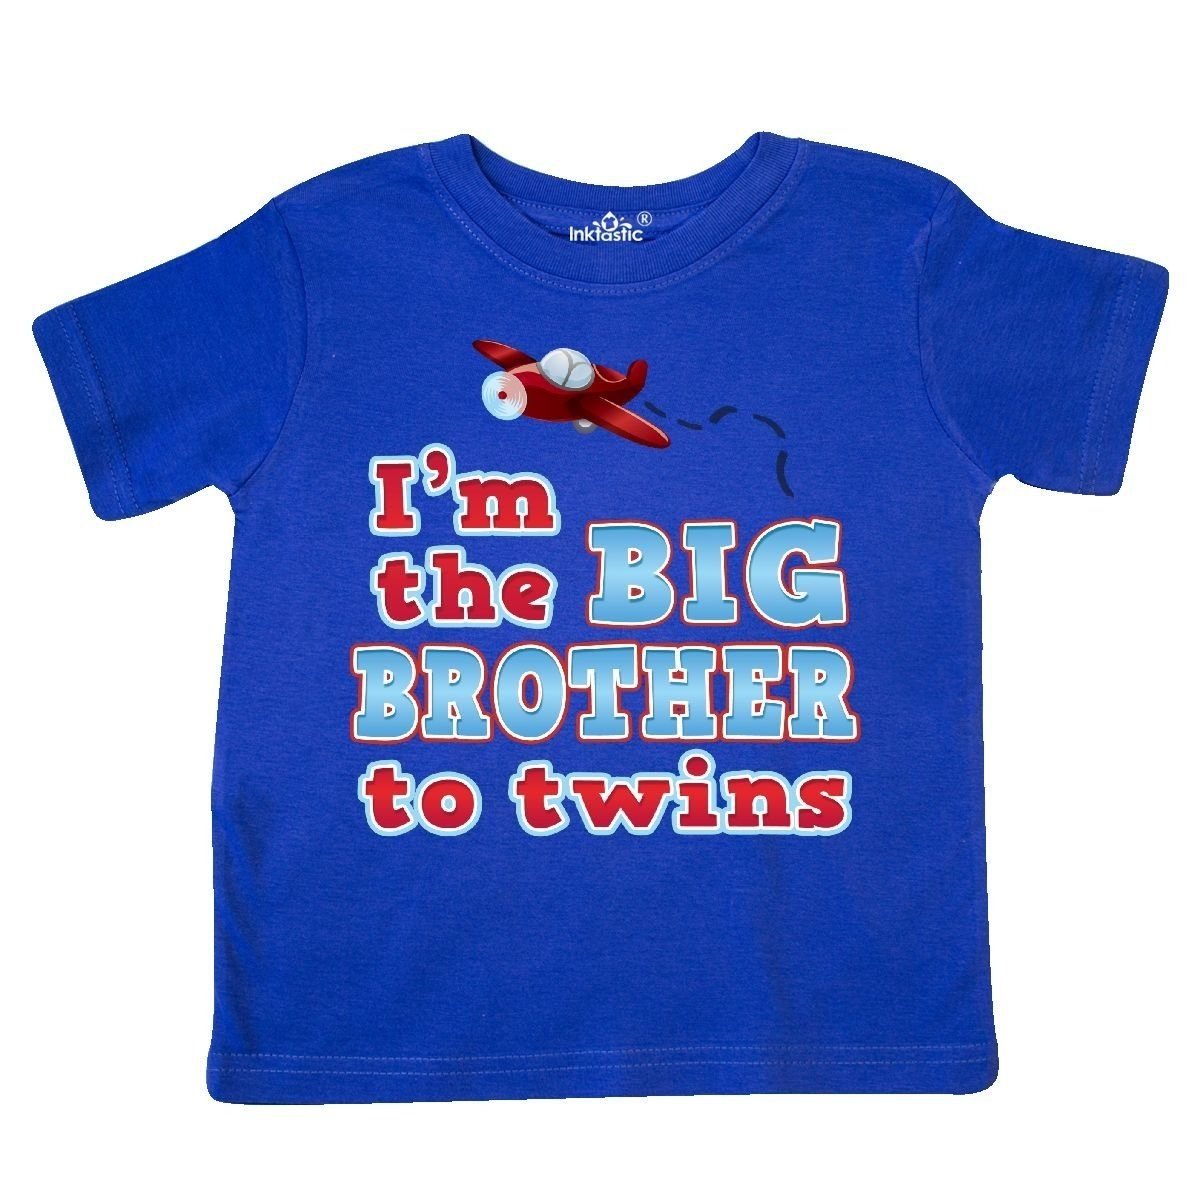 10 Unique Big Brother T Shirt Ideas inktastic im the big brother to twins toddler tshirt 2t royal blue 2022